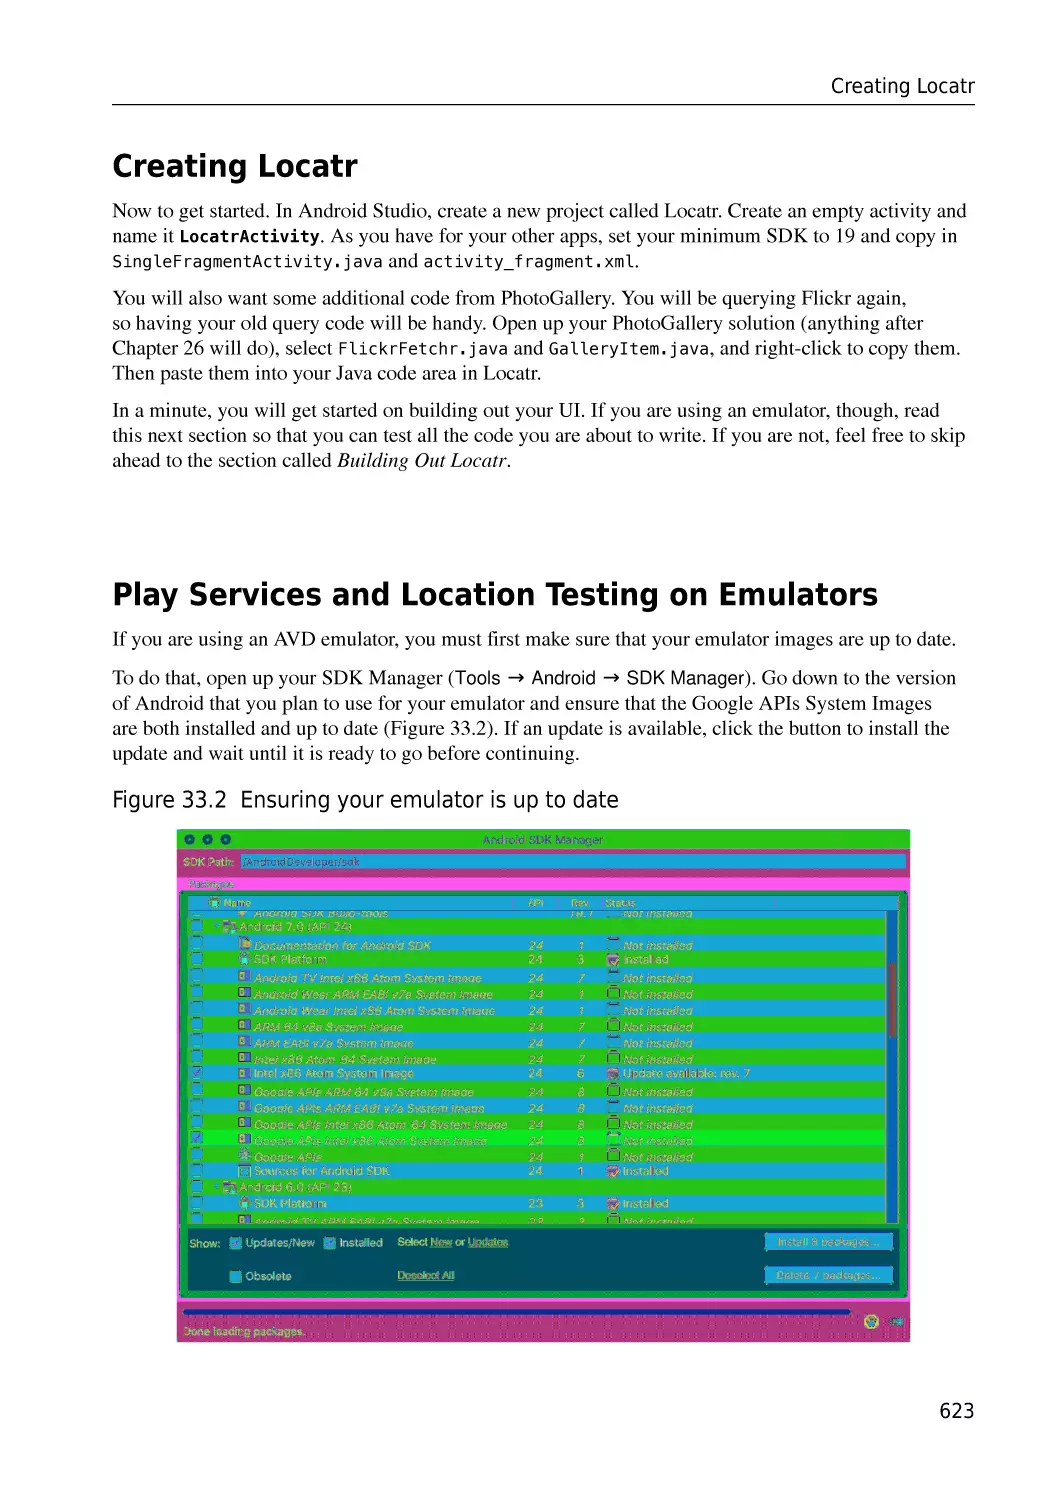 Creating Locatr
Play Services and Location Testing on Emulators